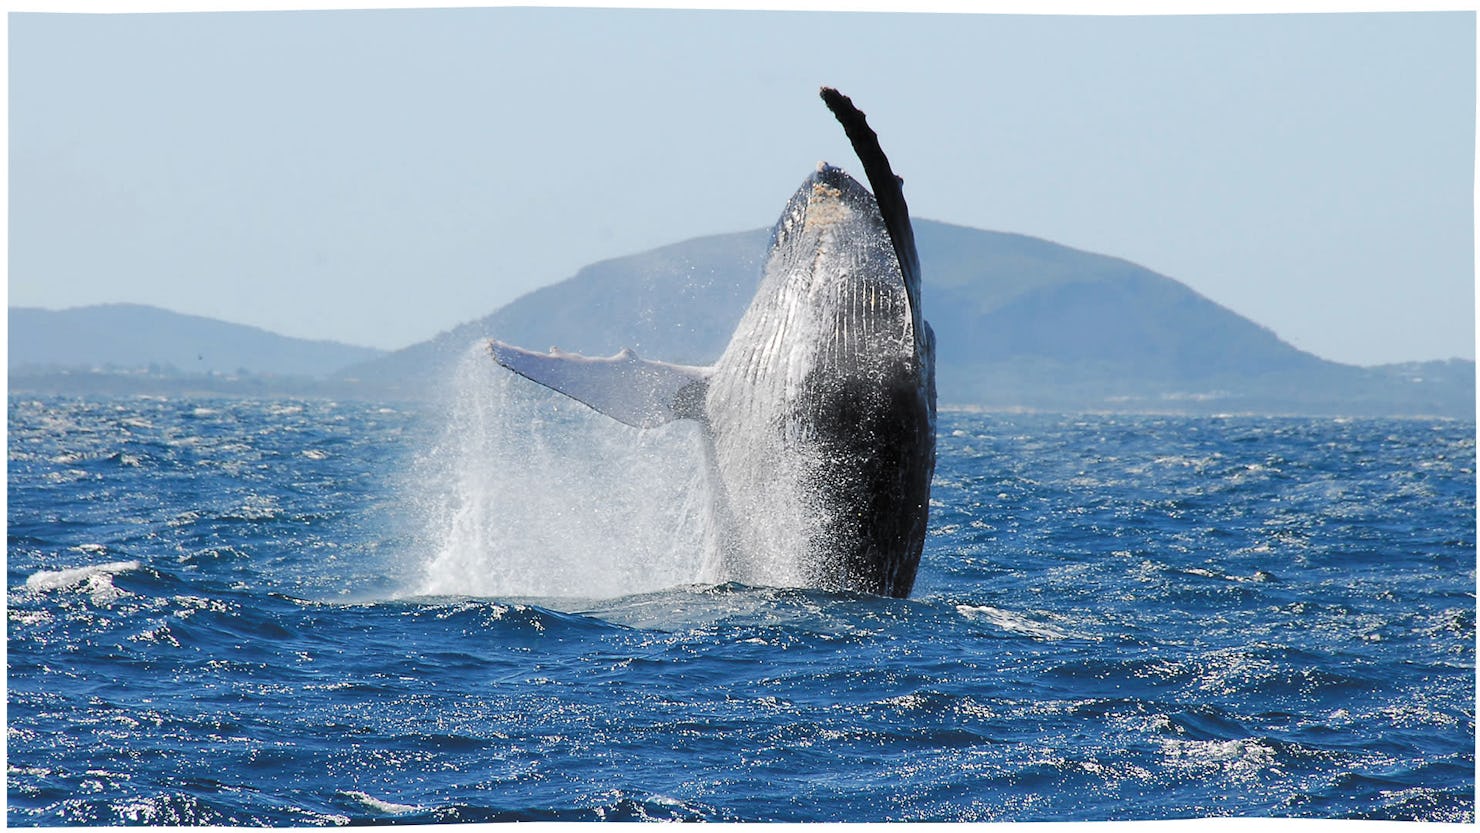 Whale breaching in front of Mount Coolum with Sunreef.